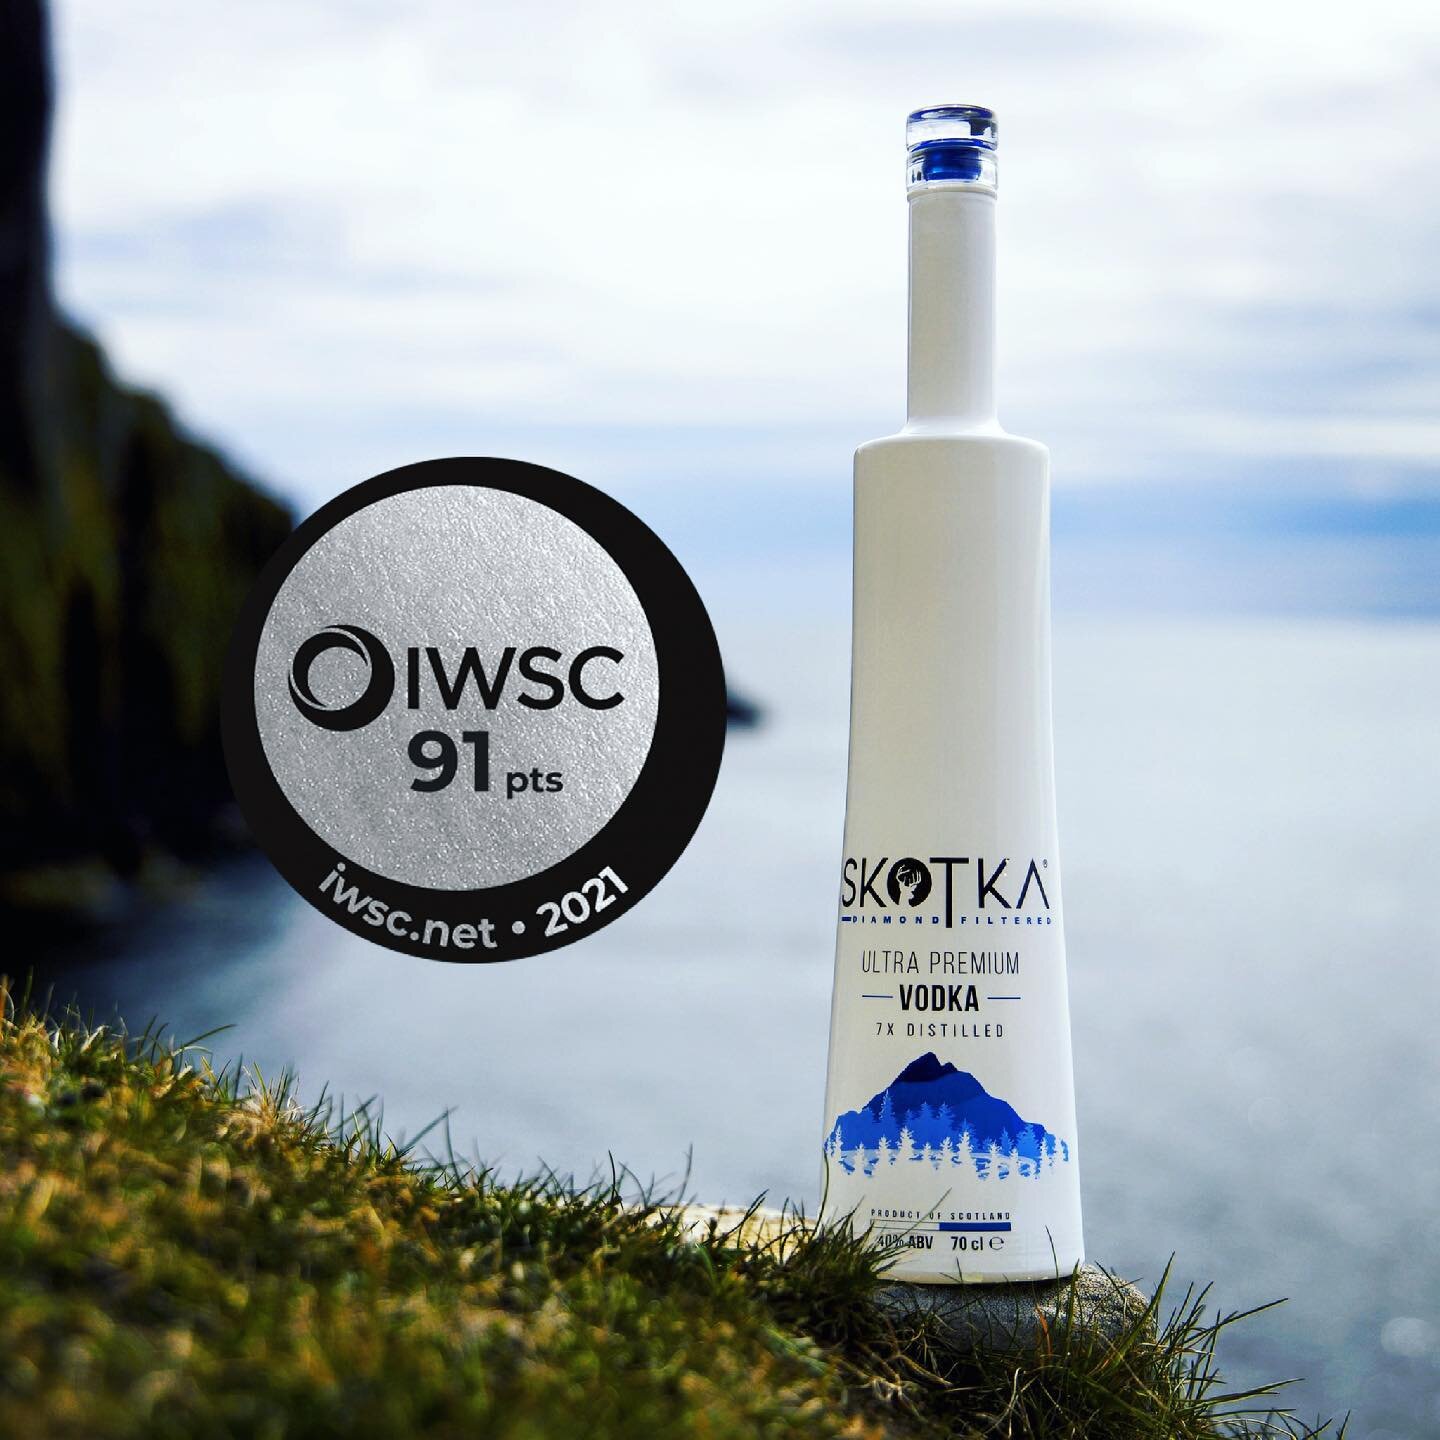 We are delighted to announce SKOTKA Vodka received a Silver Accreditation at the 2021 @theiwsc Awards. 🥈🍸 In the most competitive competition to date with over 4,000 spirit samples being assessed, the judges awards SKOTKA Vodka a 91-point IWSC rati